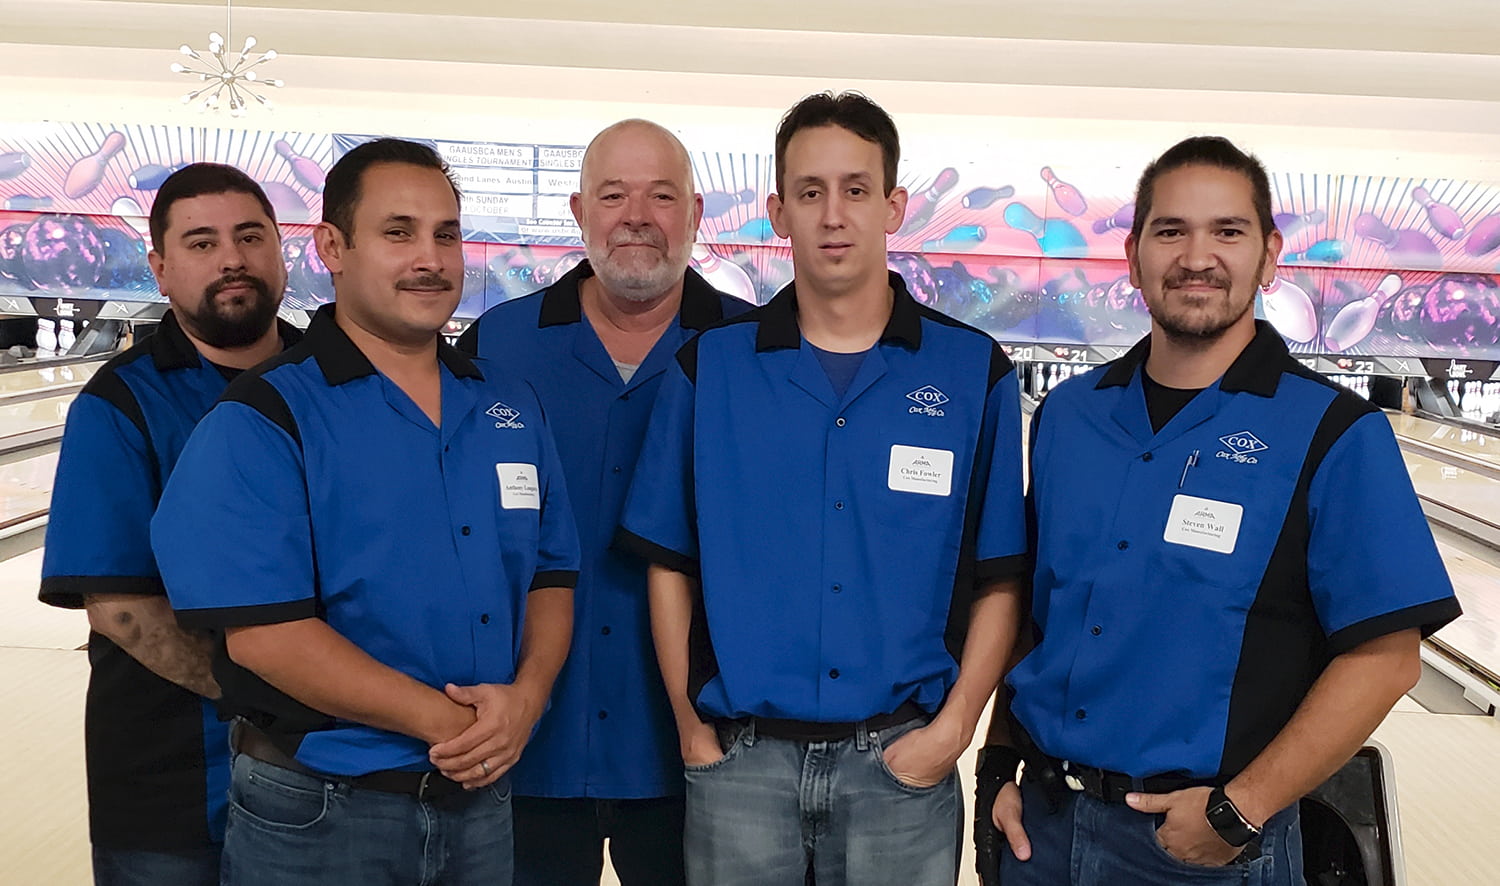 The Cox Mfg Champion Bowling Team (left to right: Ygnacio "Nacho" Gutierrez, Anthony Longoria, Wes Landers, Christopher Fowler, and Steven Wall).